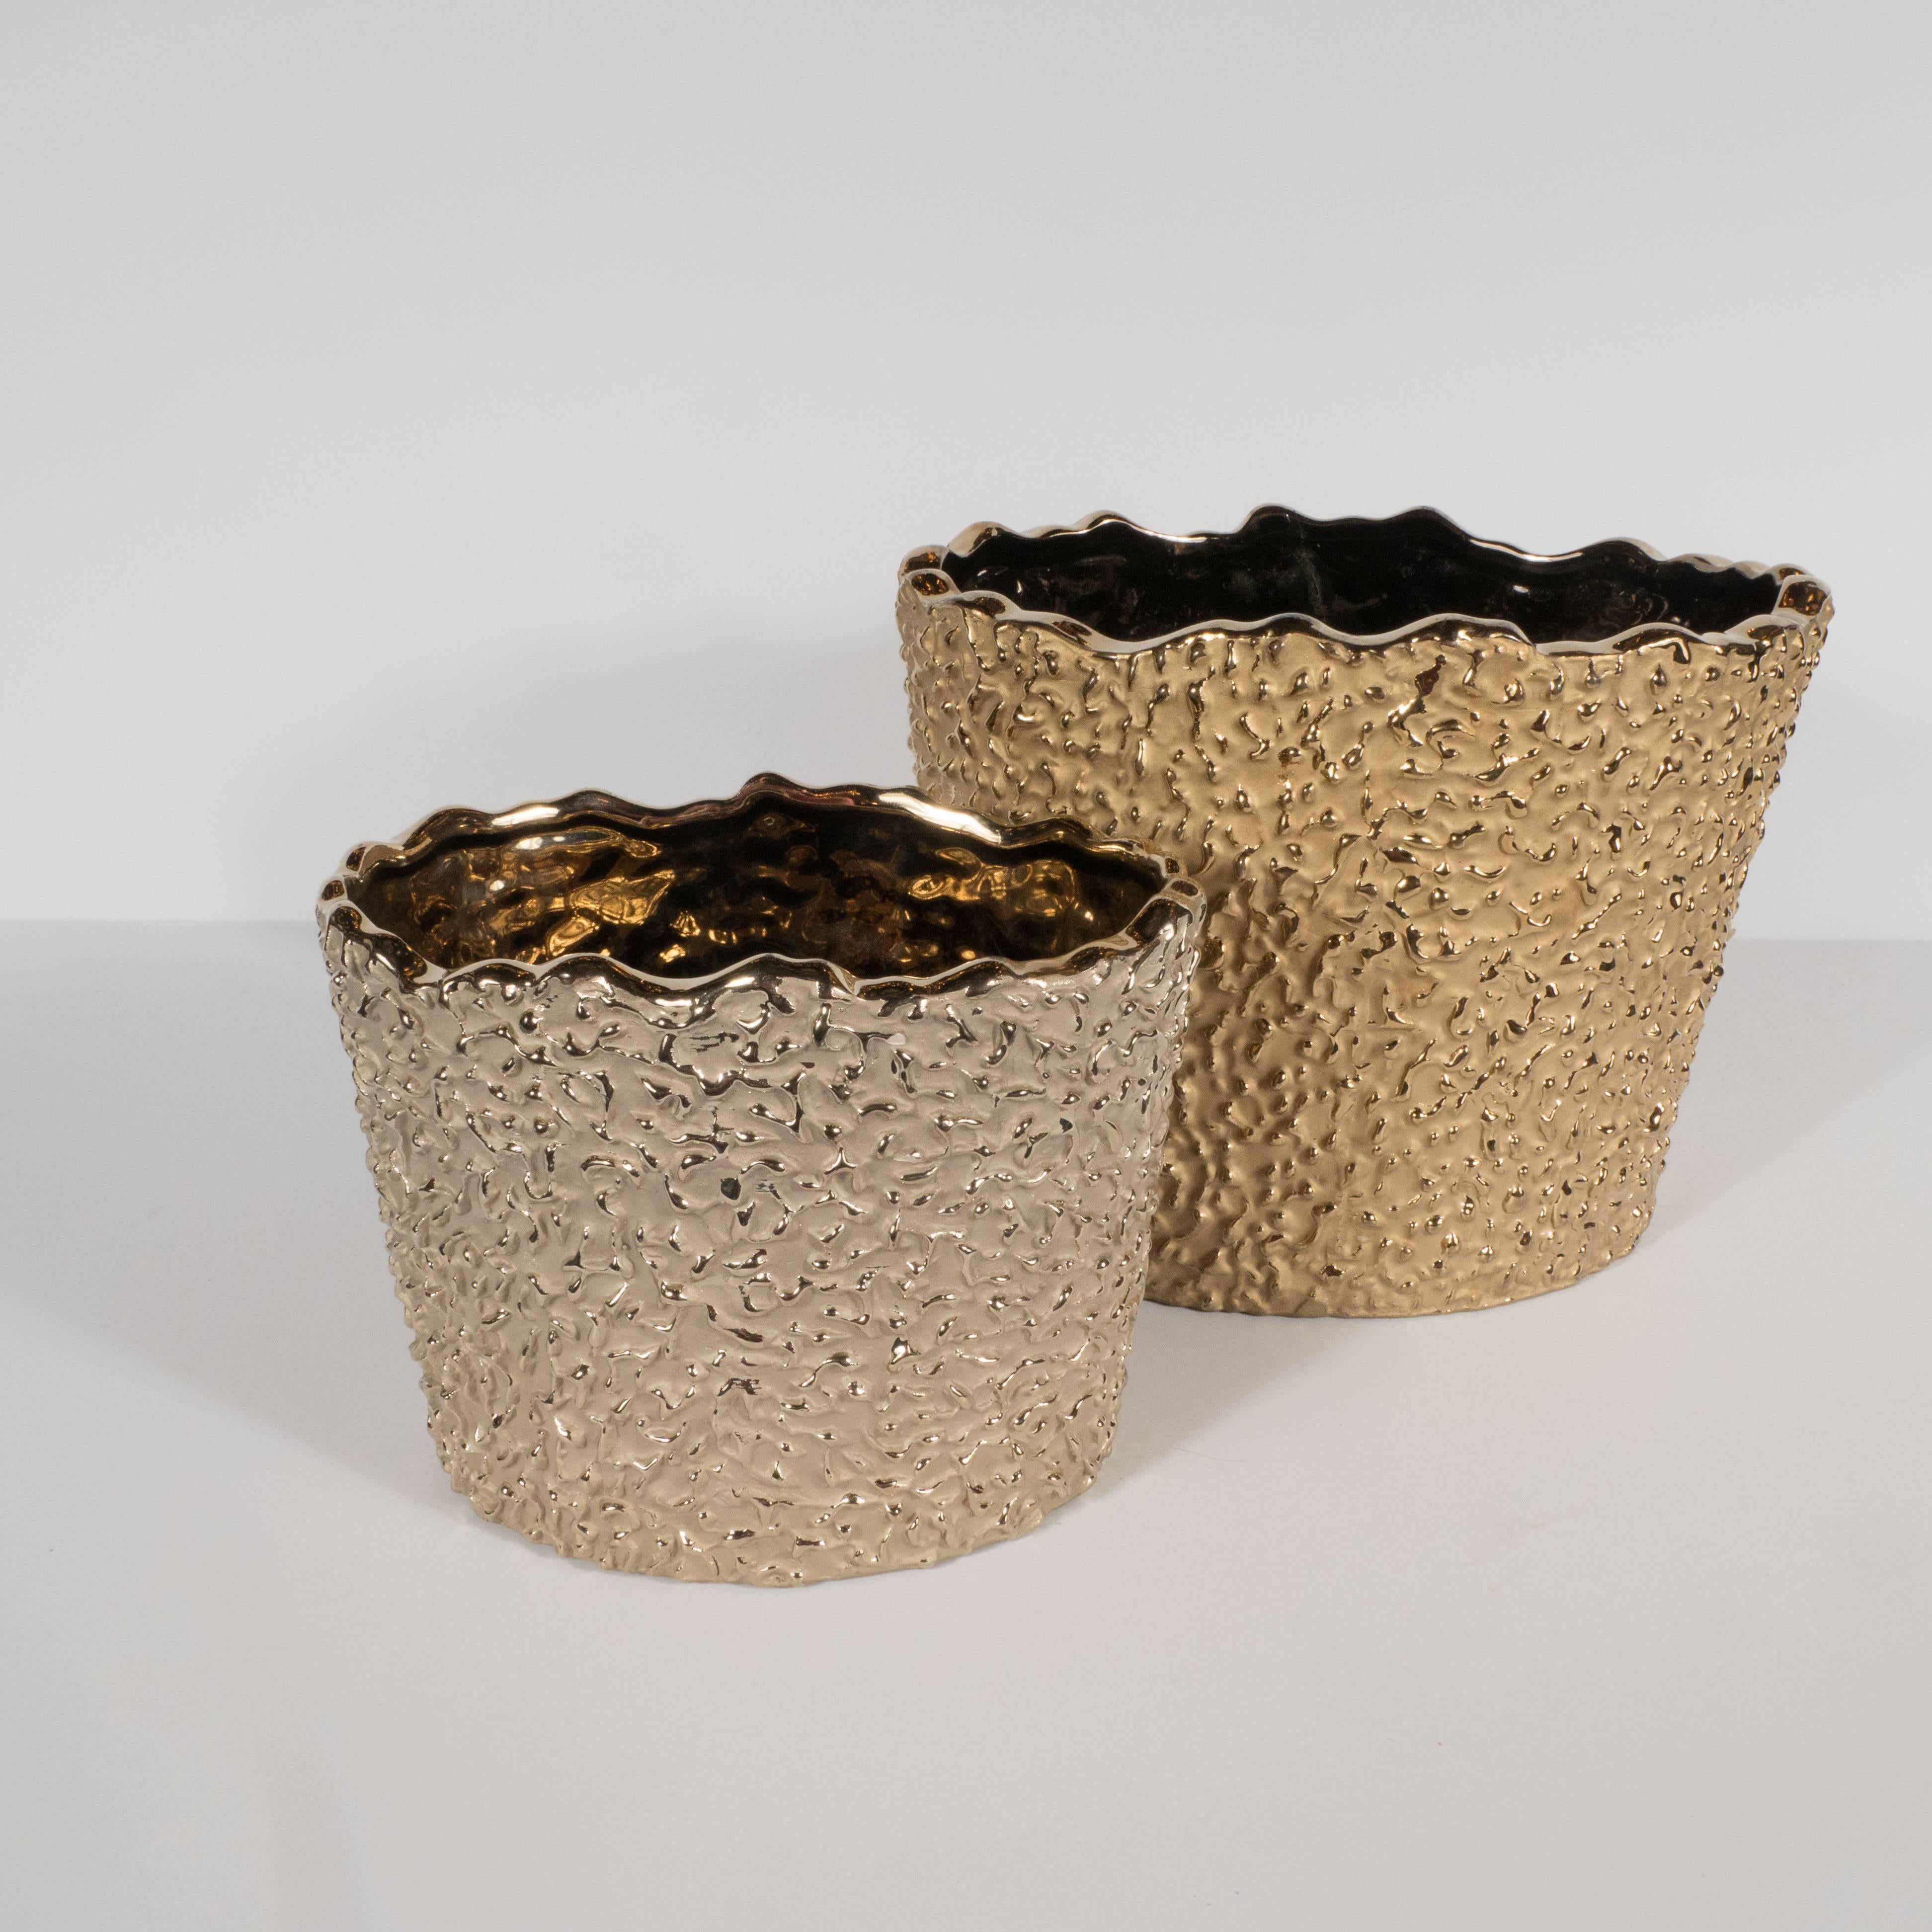 North American Pair of Organic Modern Handcrafted Ceramic Orchid Pots in Shades of Yellow Gold